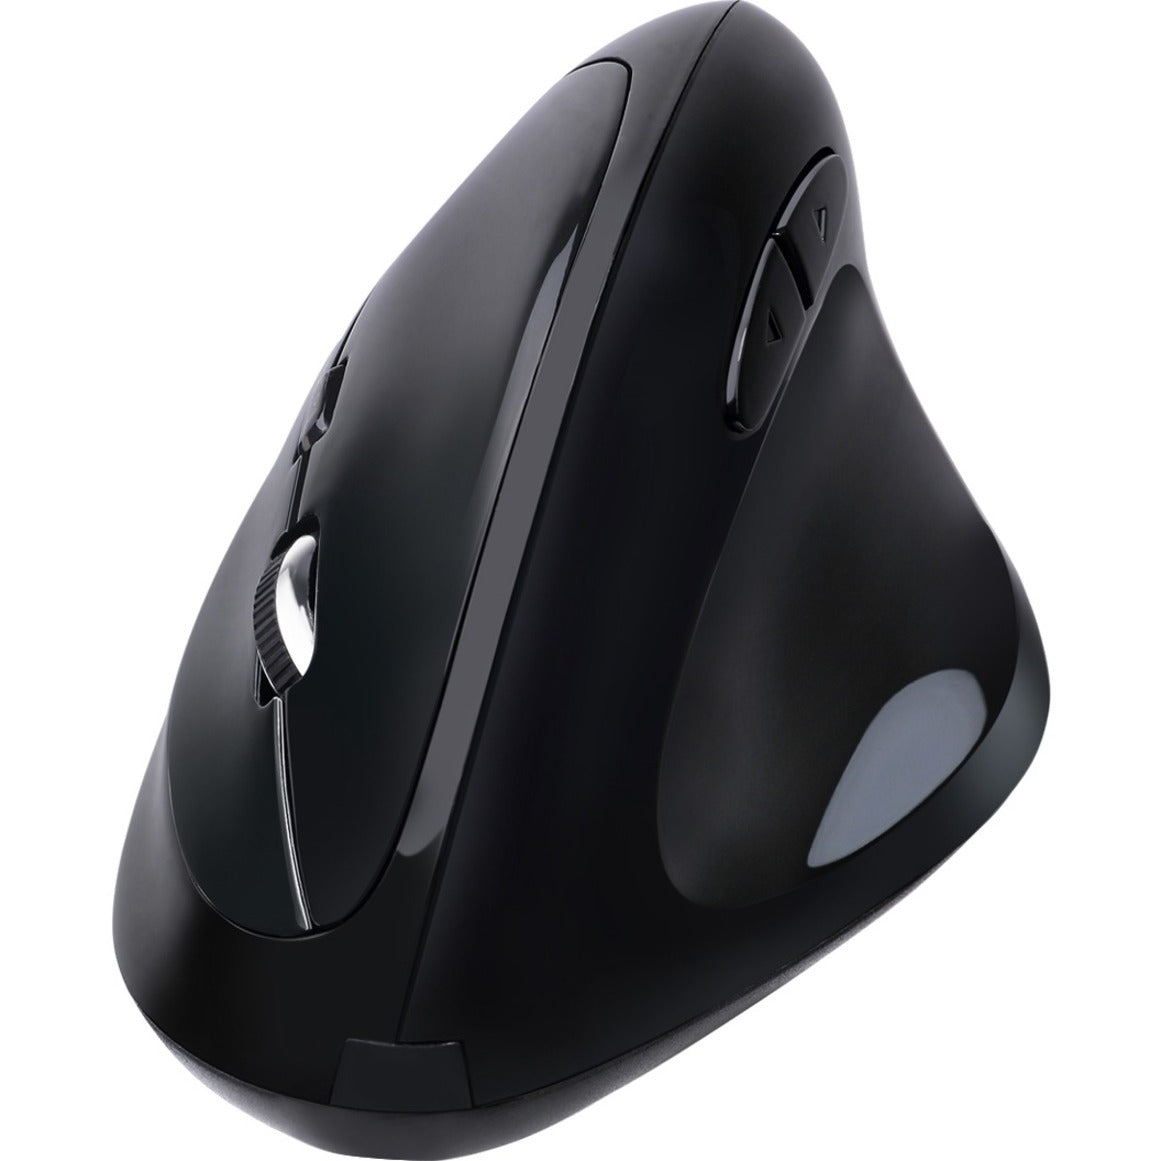 Adesso IMOUSE E30 iMouse E30 - 2.4 GHz Wireless Vertical Programmable Mouse, Ergonomic Fit, 2400 dpi, USB